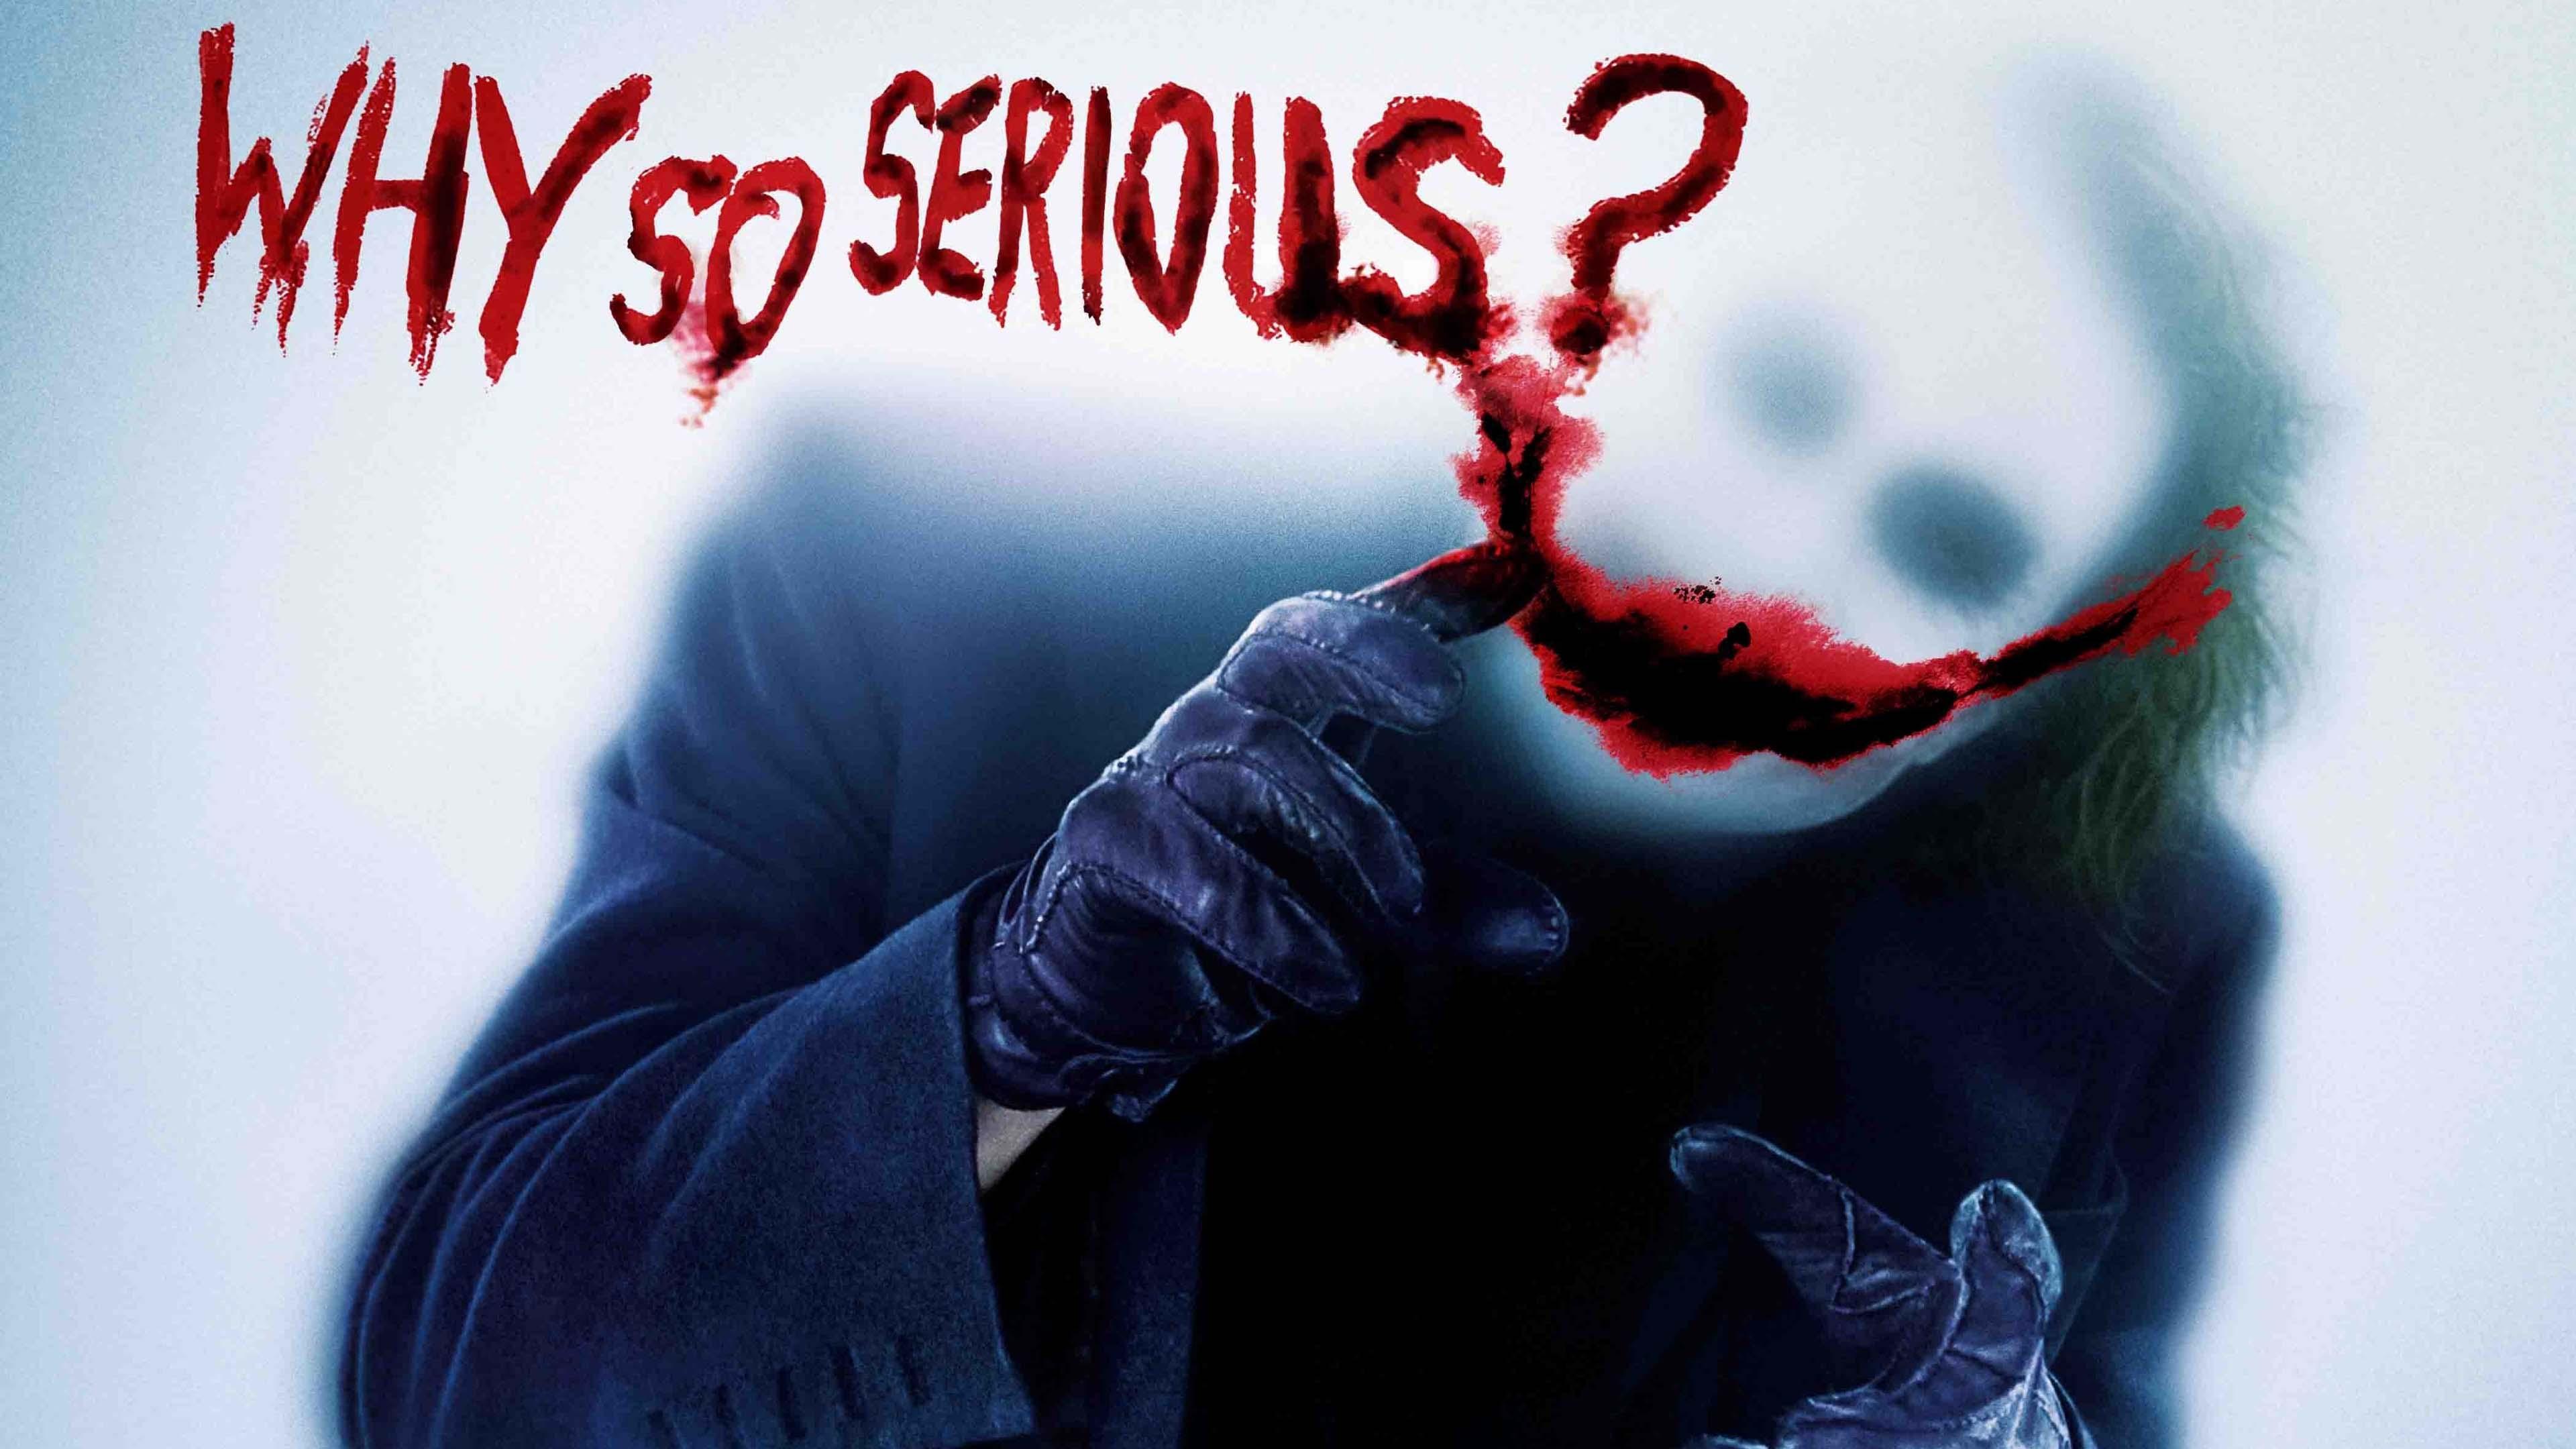 Why so Serious Sticker For Laptop Screen Background design